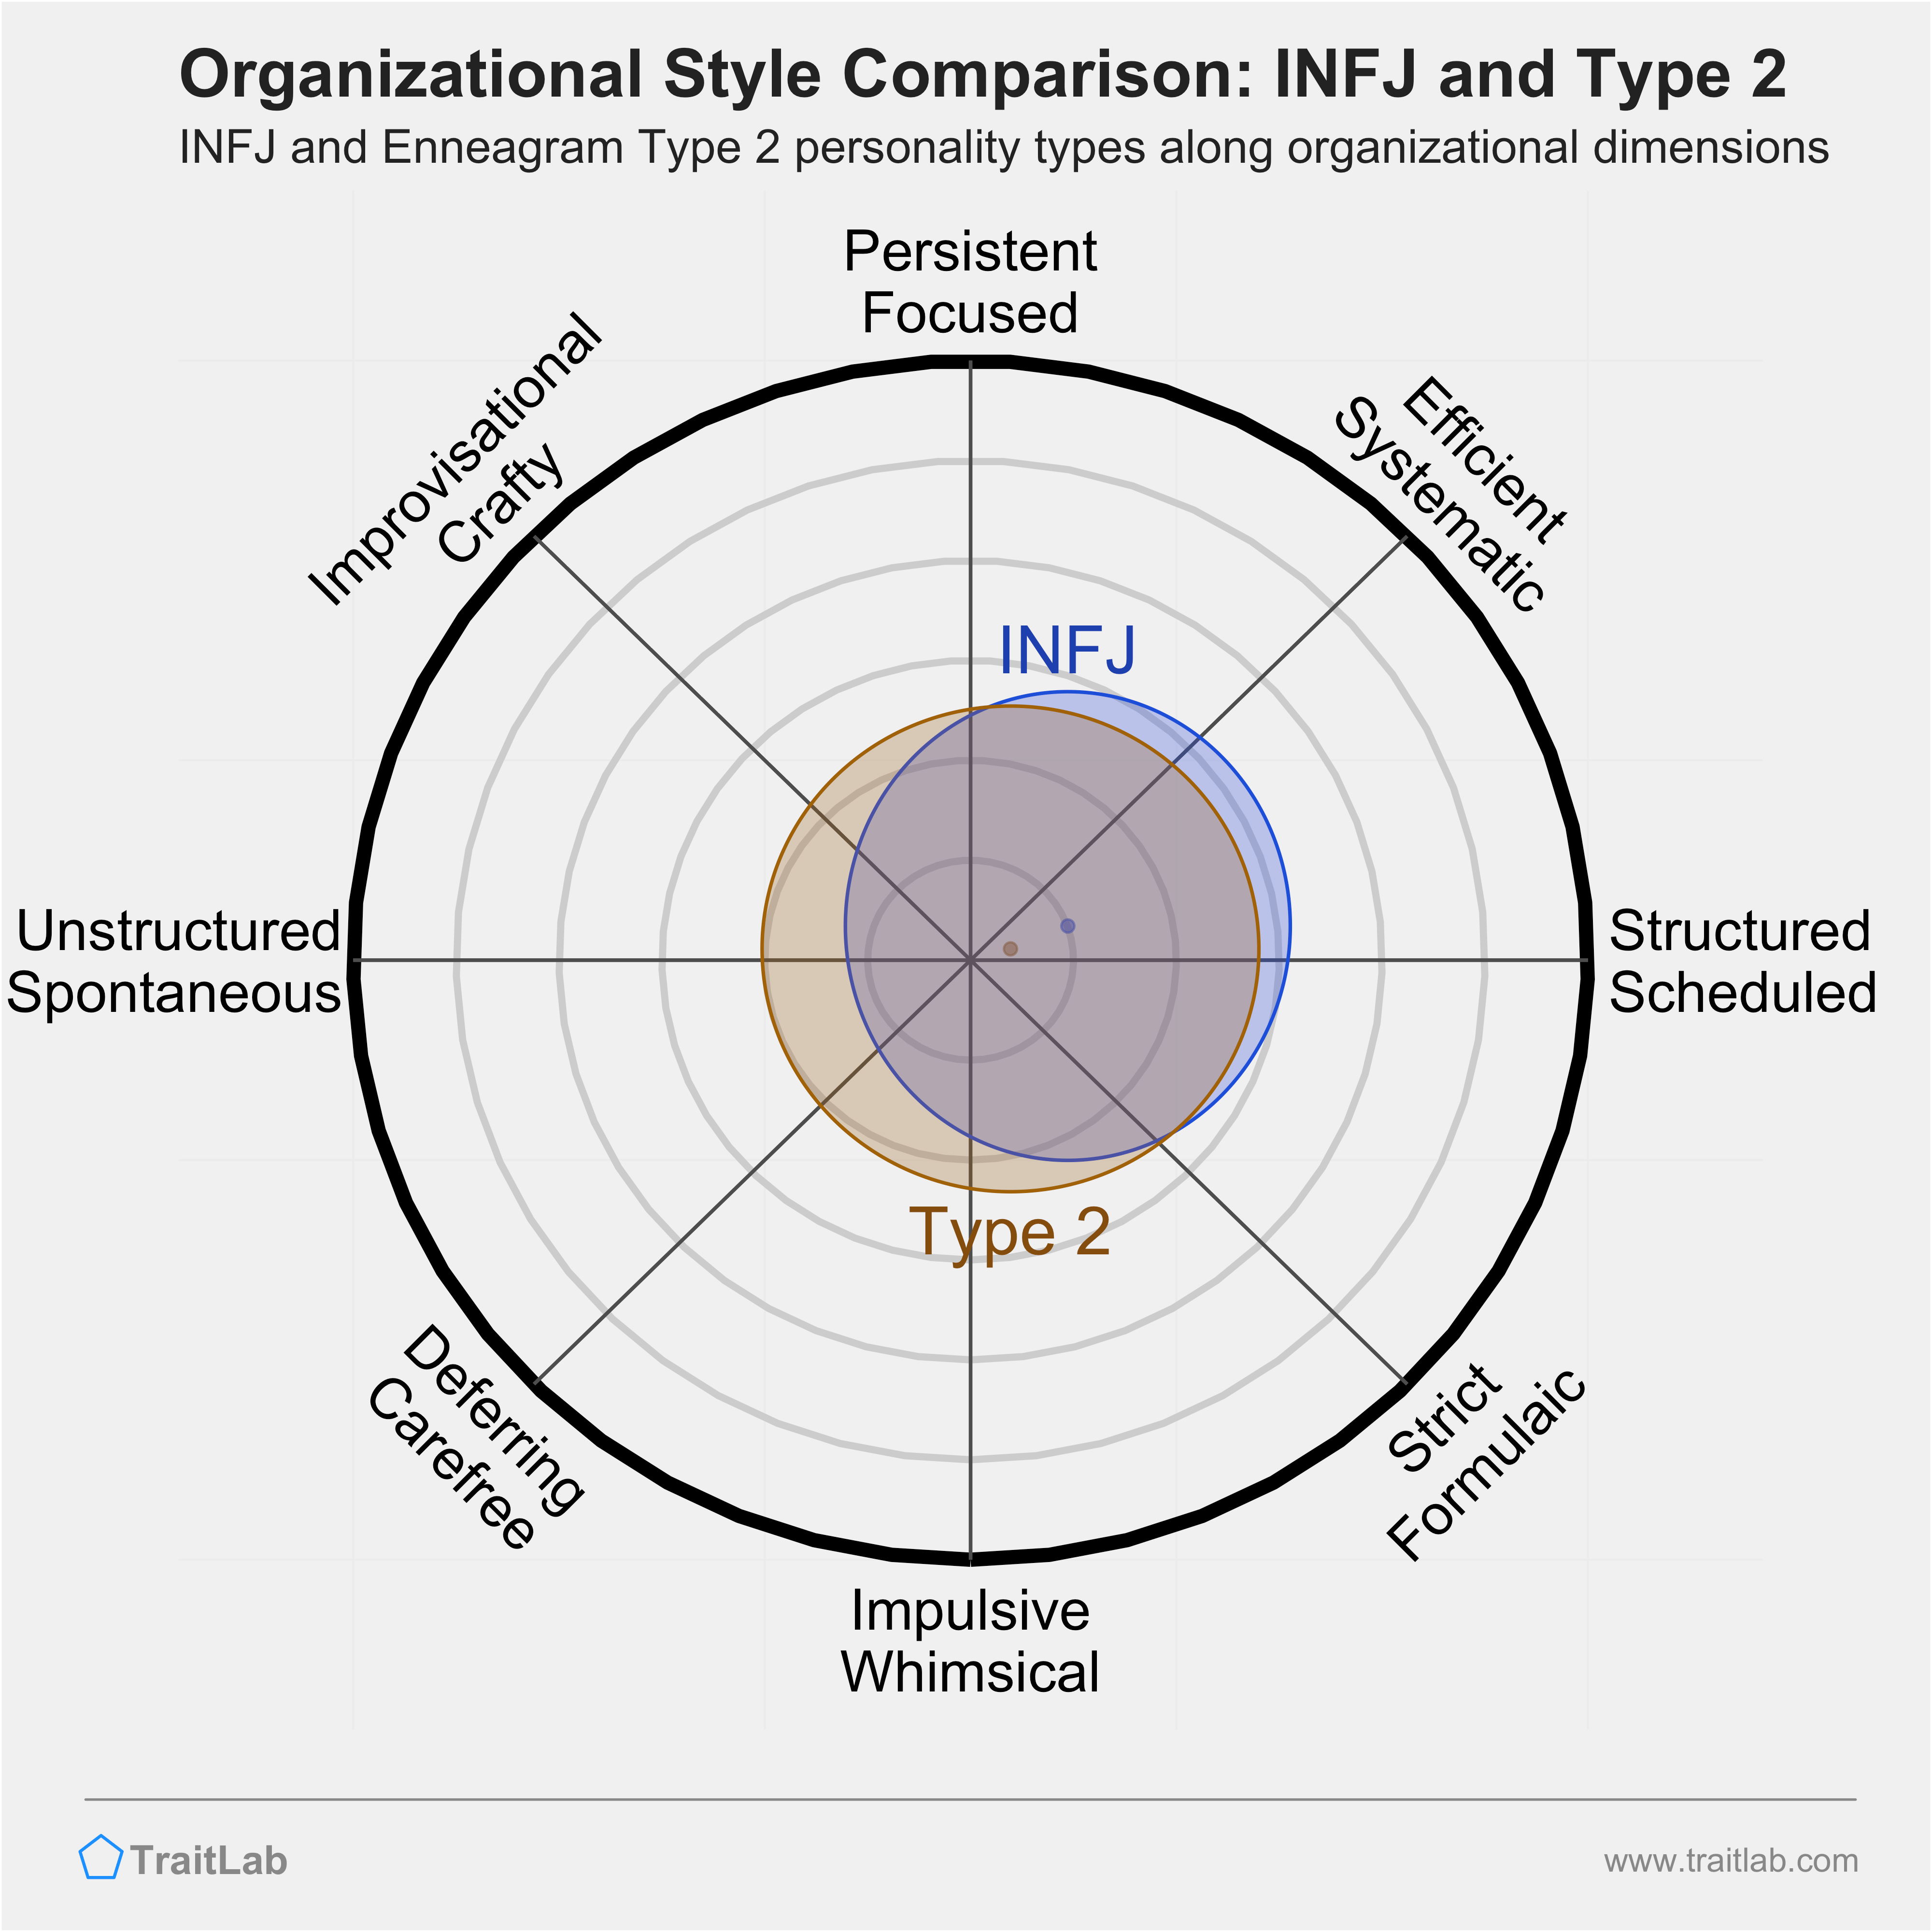 INFJ and Type 2 comparison across organizational dimensions